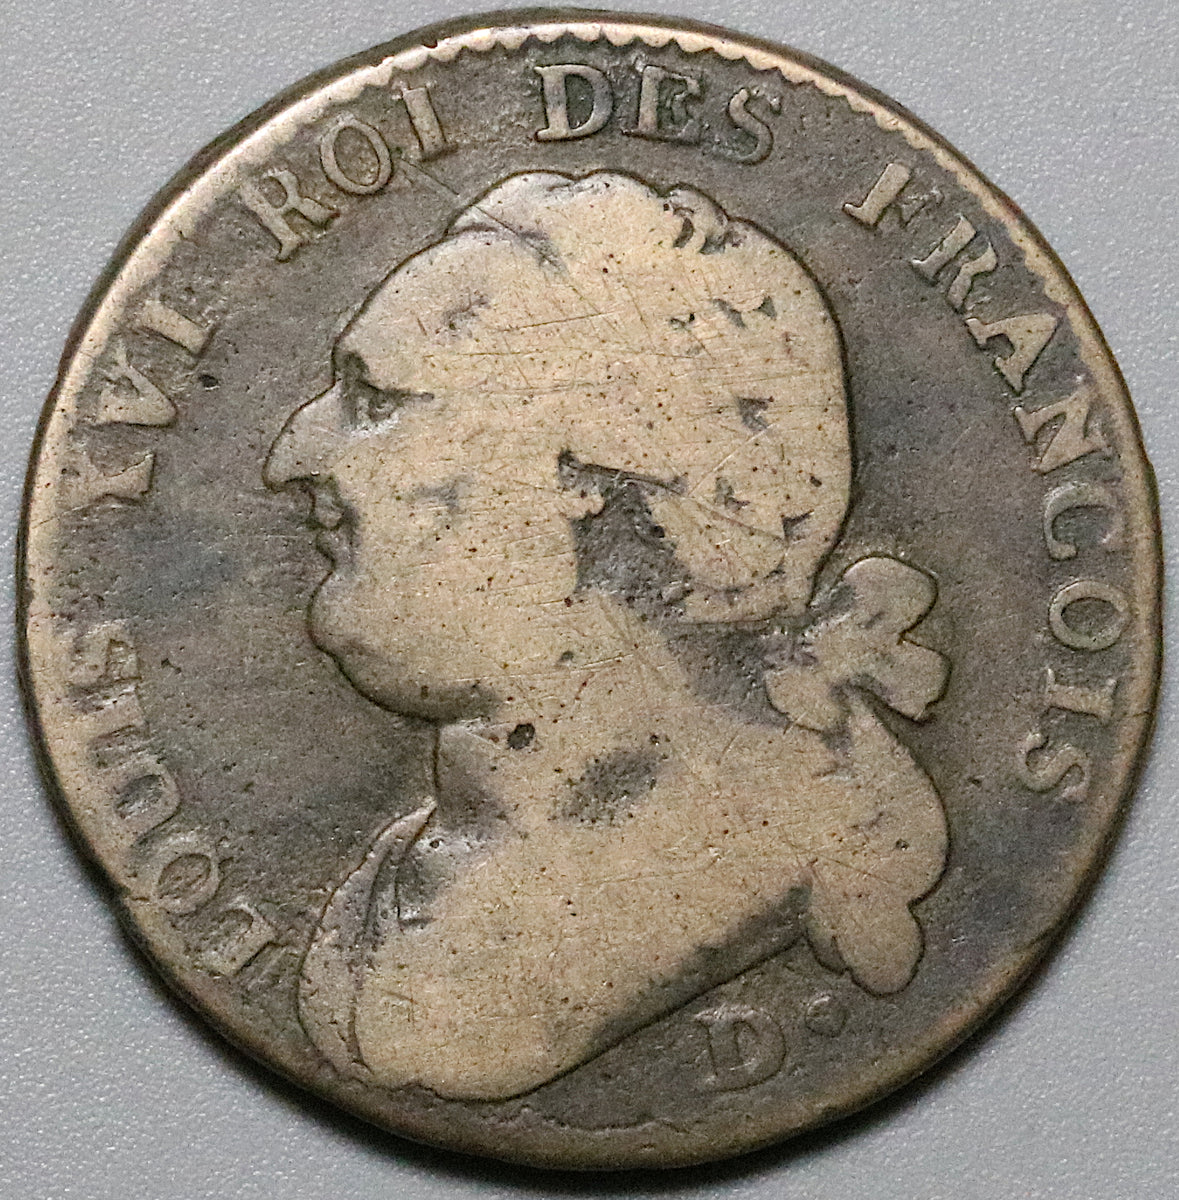  1790s France 12 Deniers coin pendant French king Louis